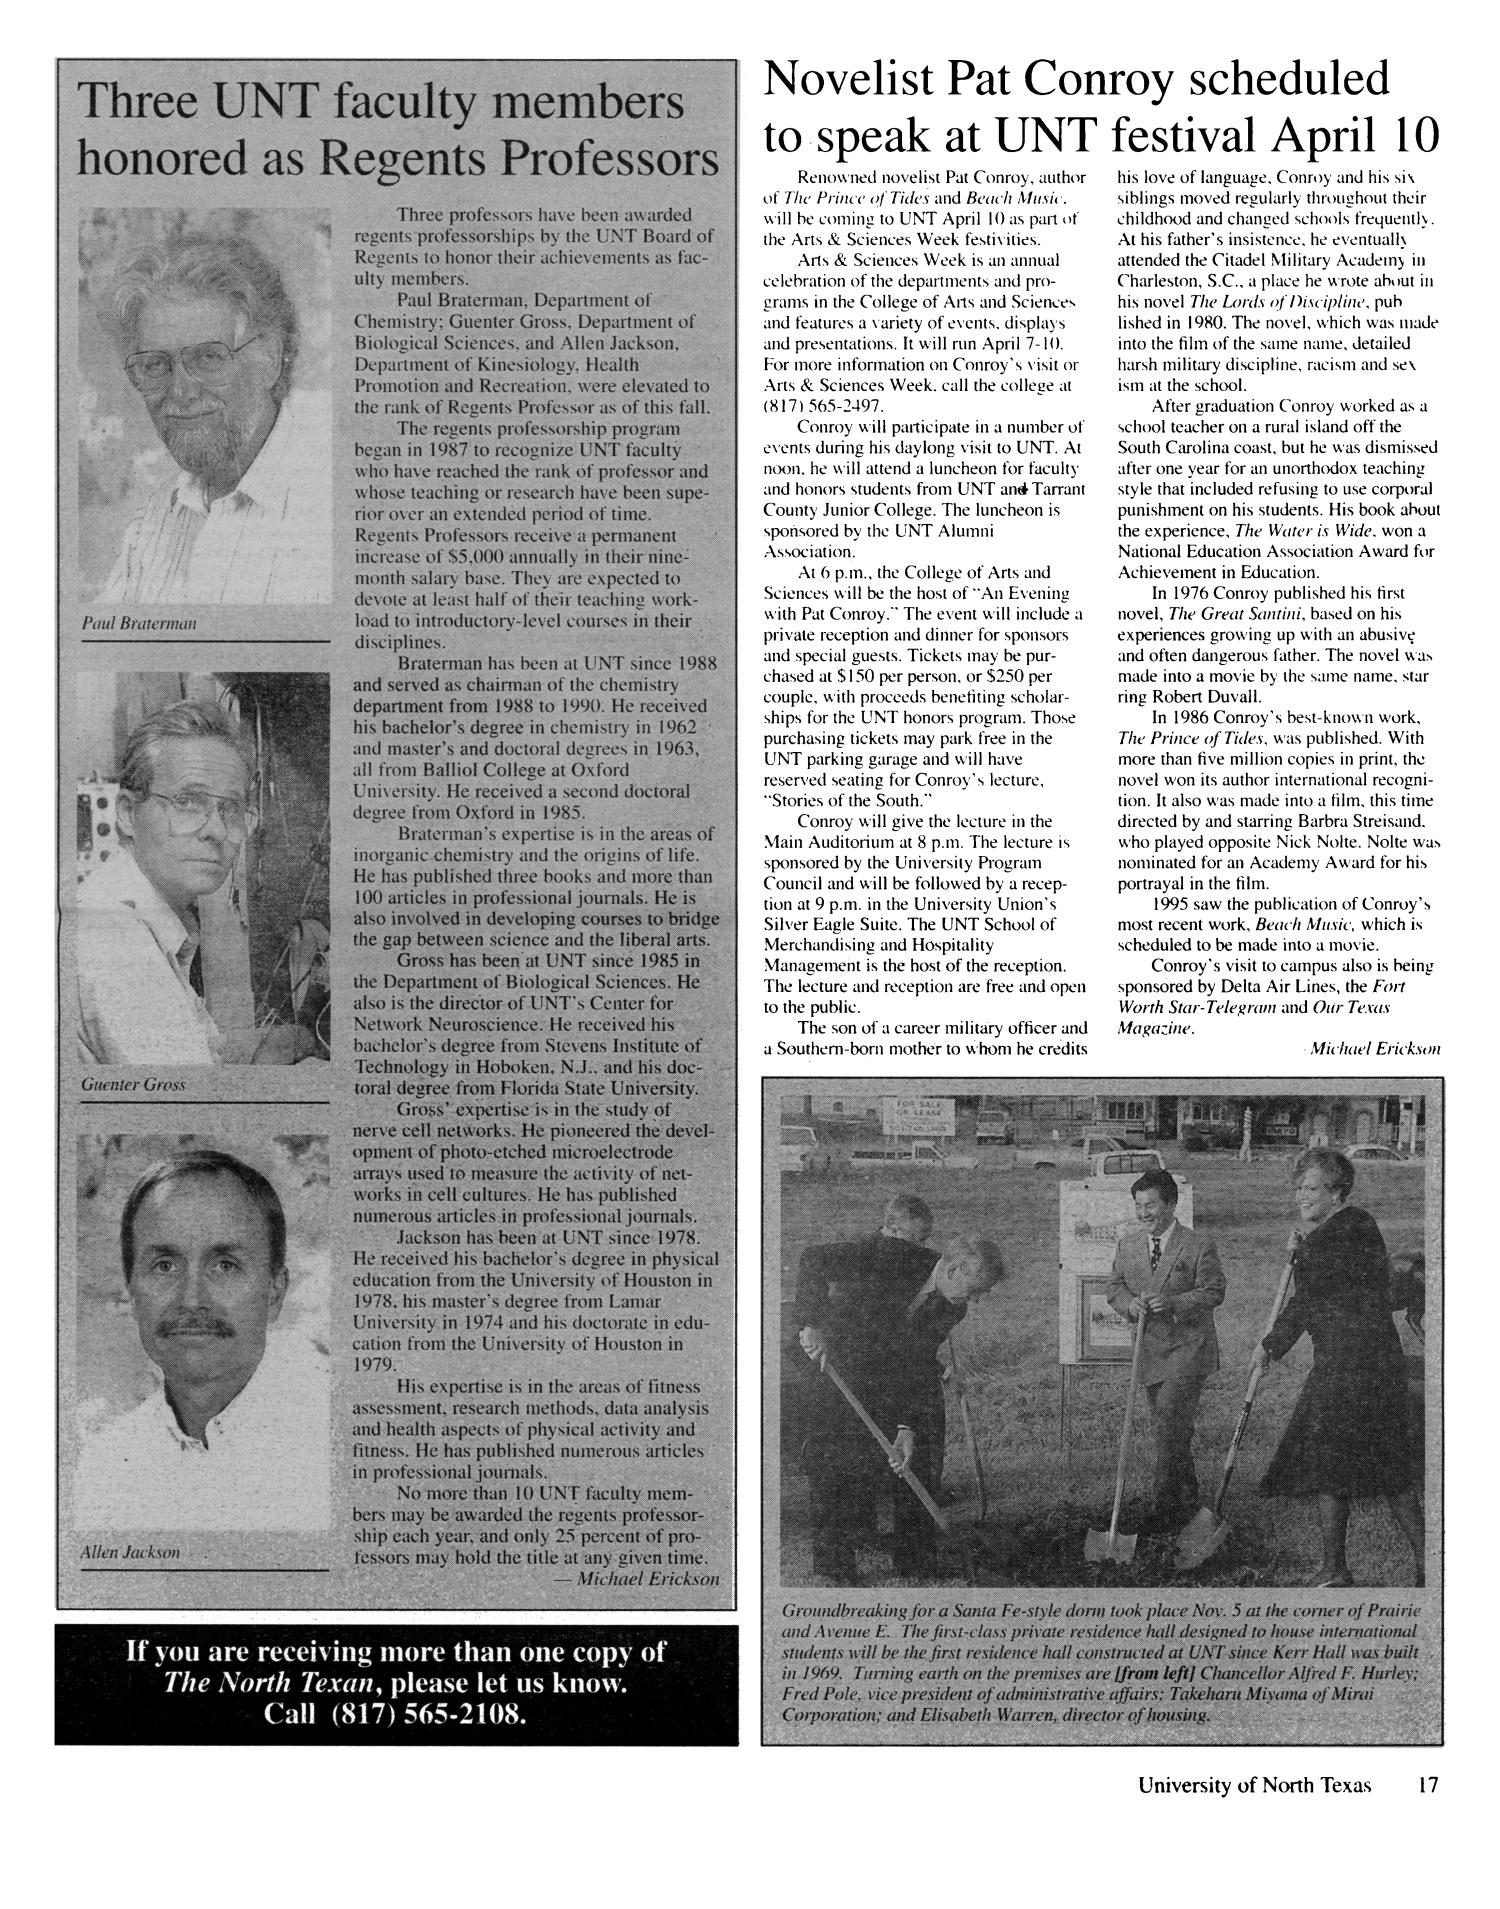 The North Texan, Volume 46, Number 4, Winter 1996
                                                
                                                    17
                                                